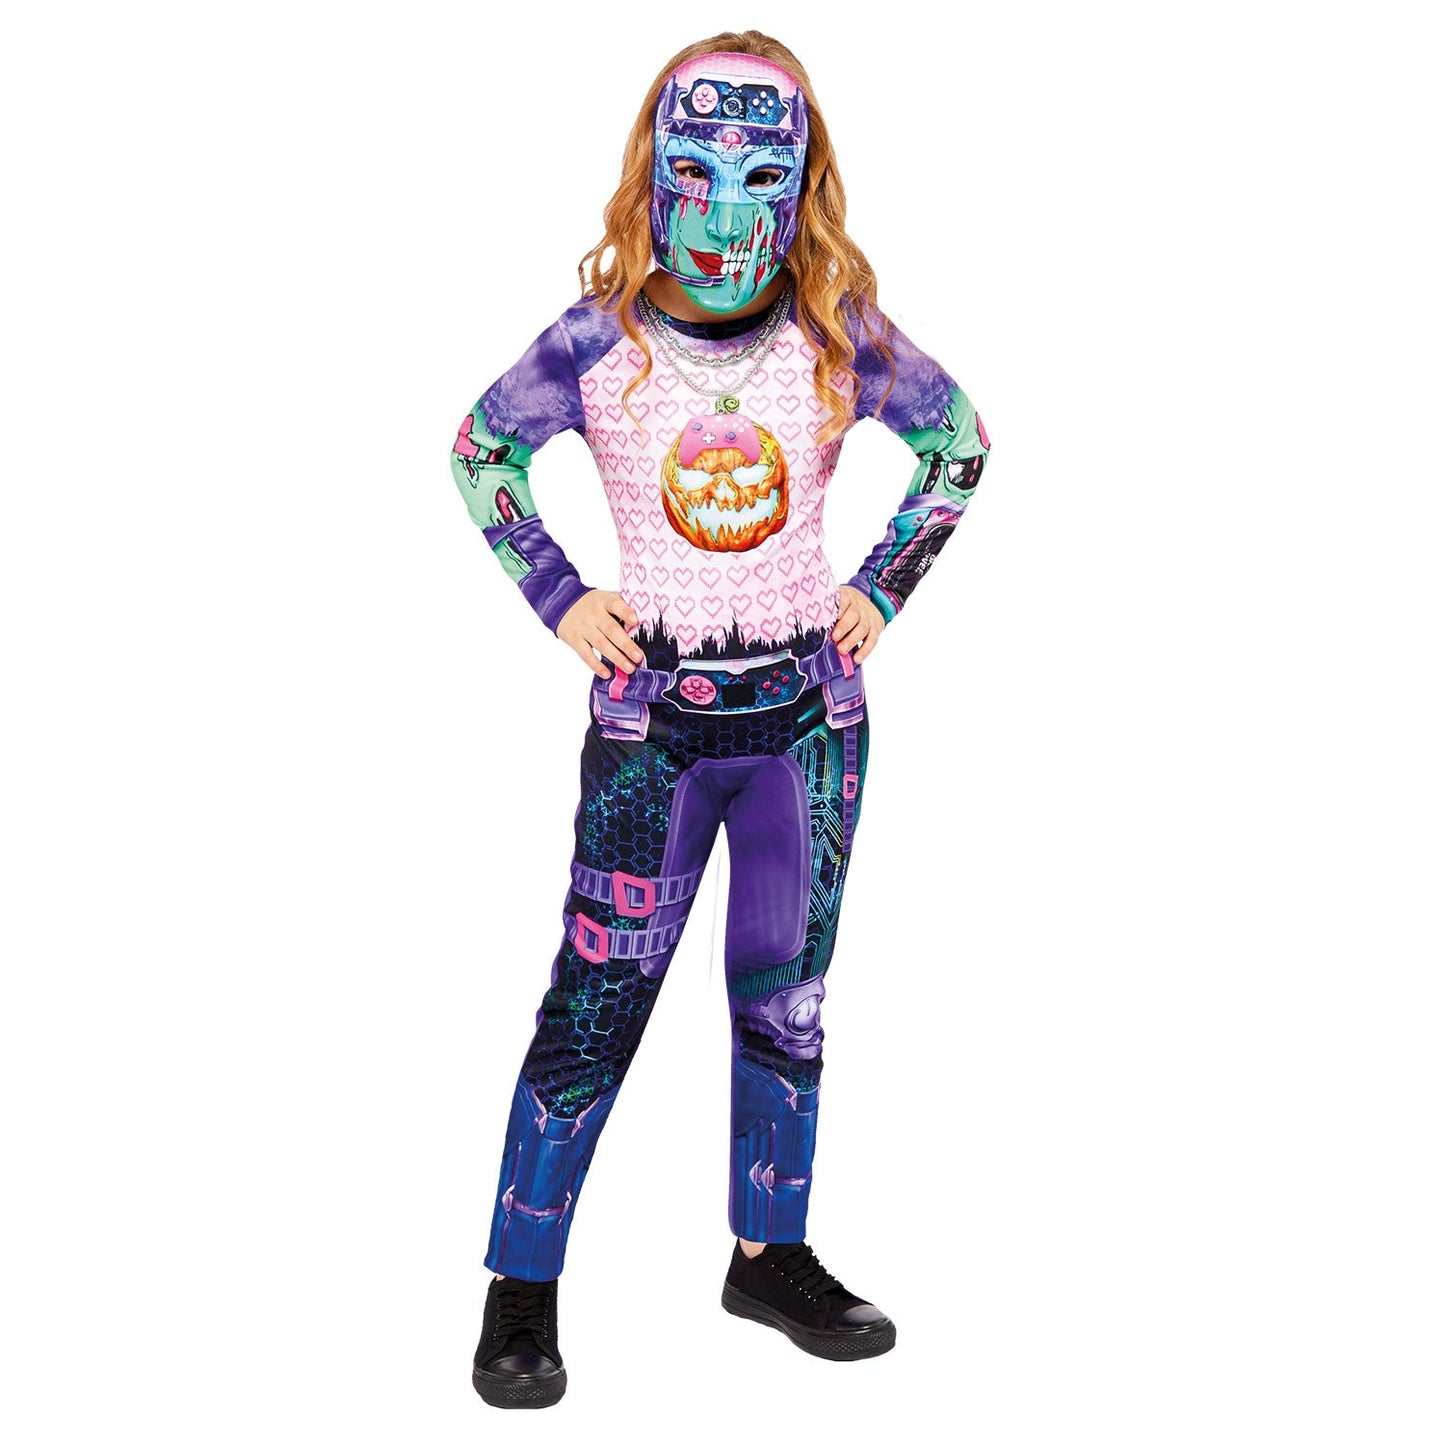 Gamer Girl Costume includes, jumpsuit and mask